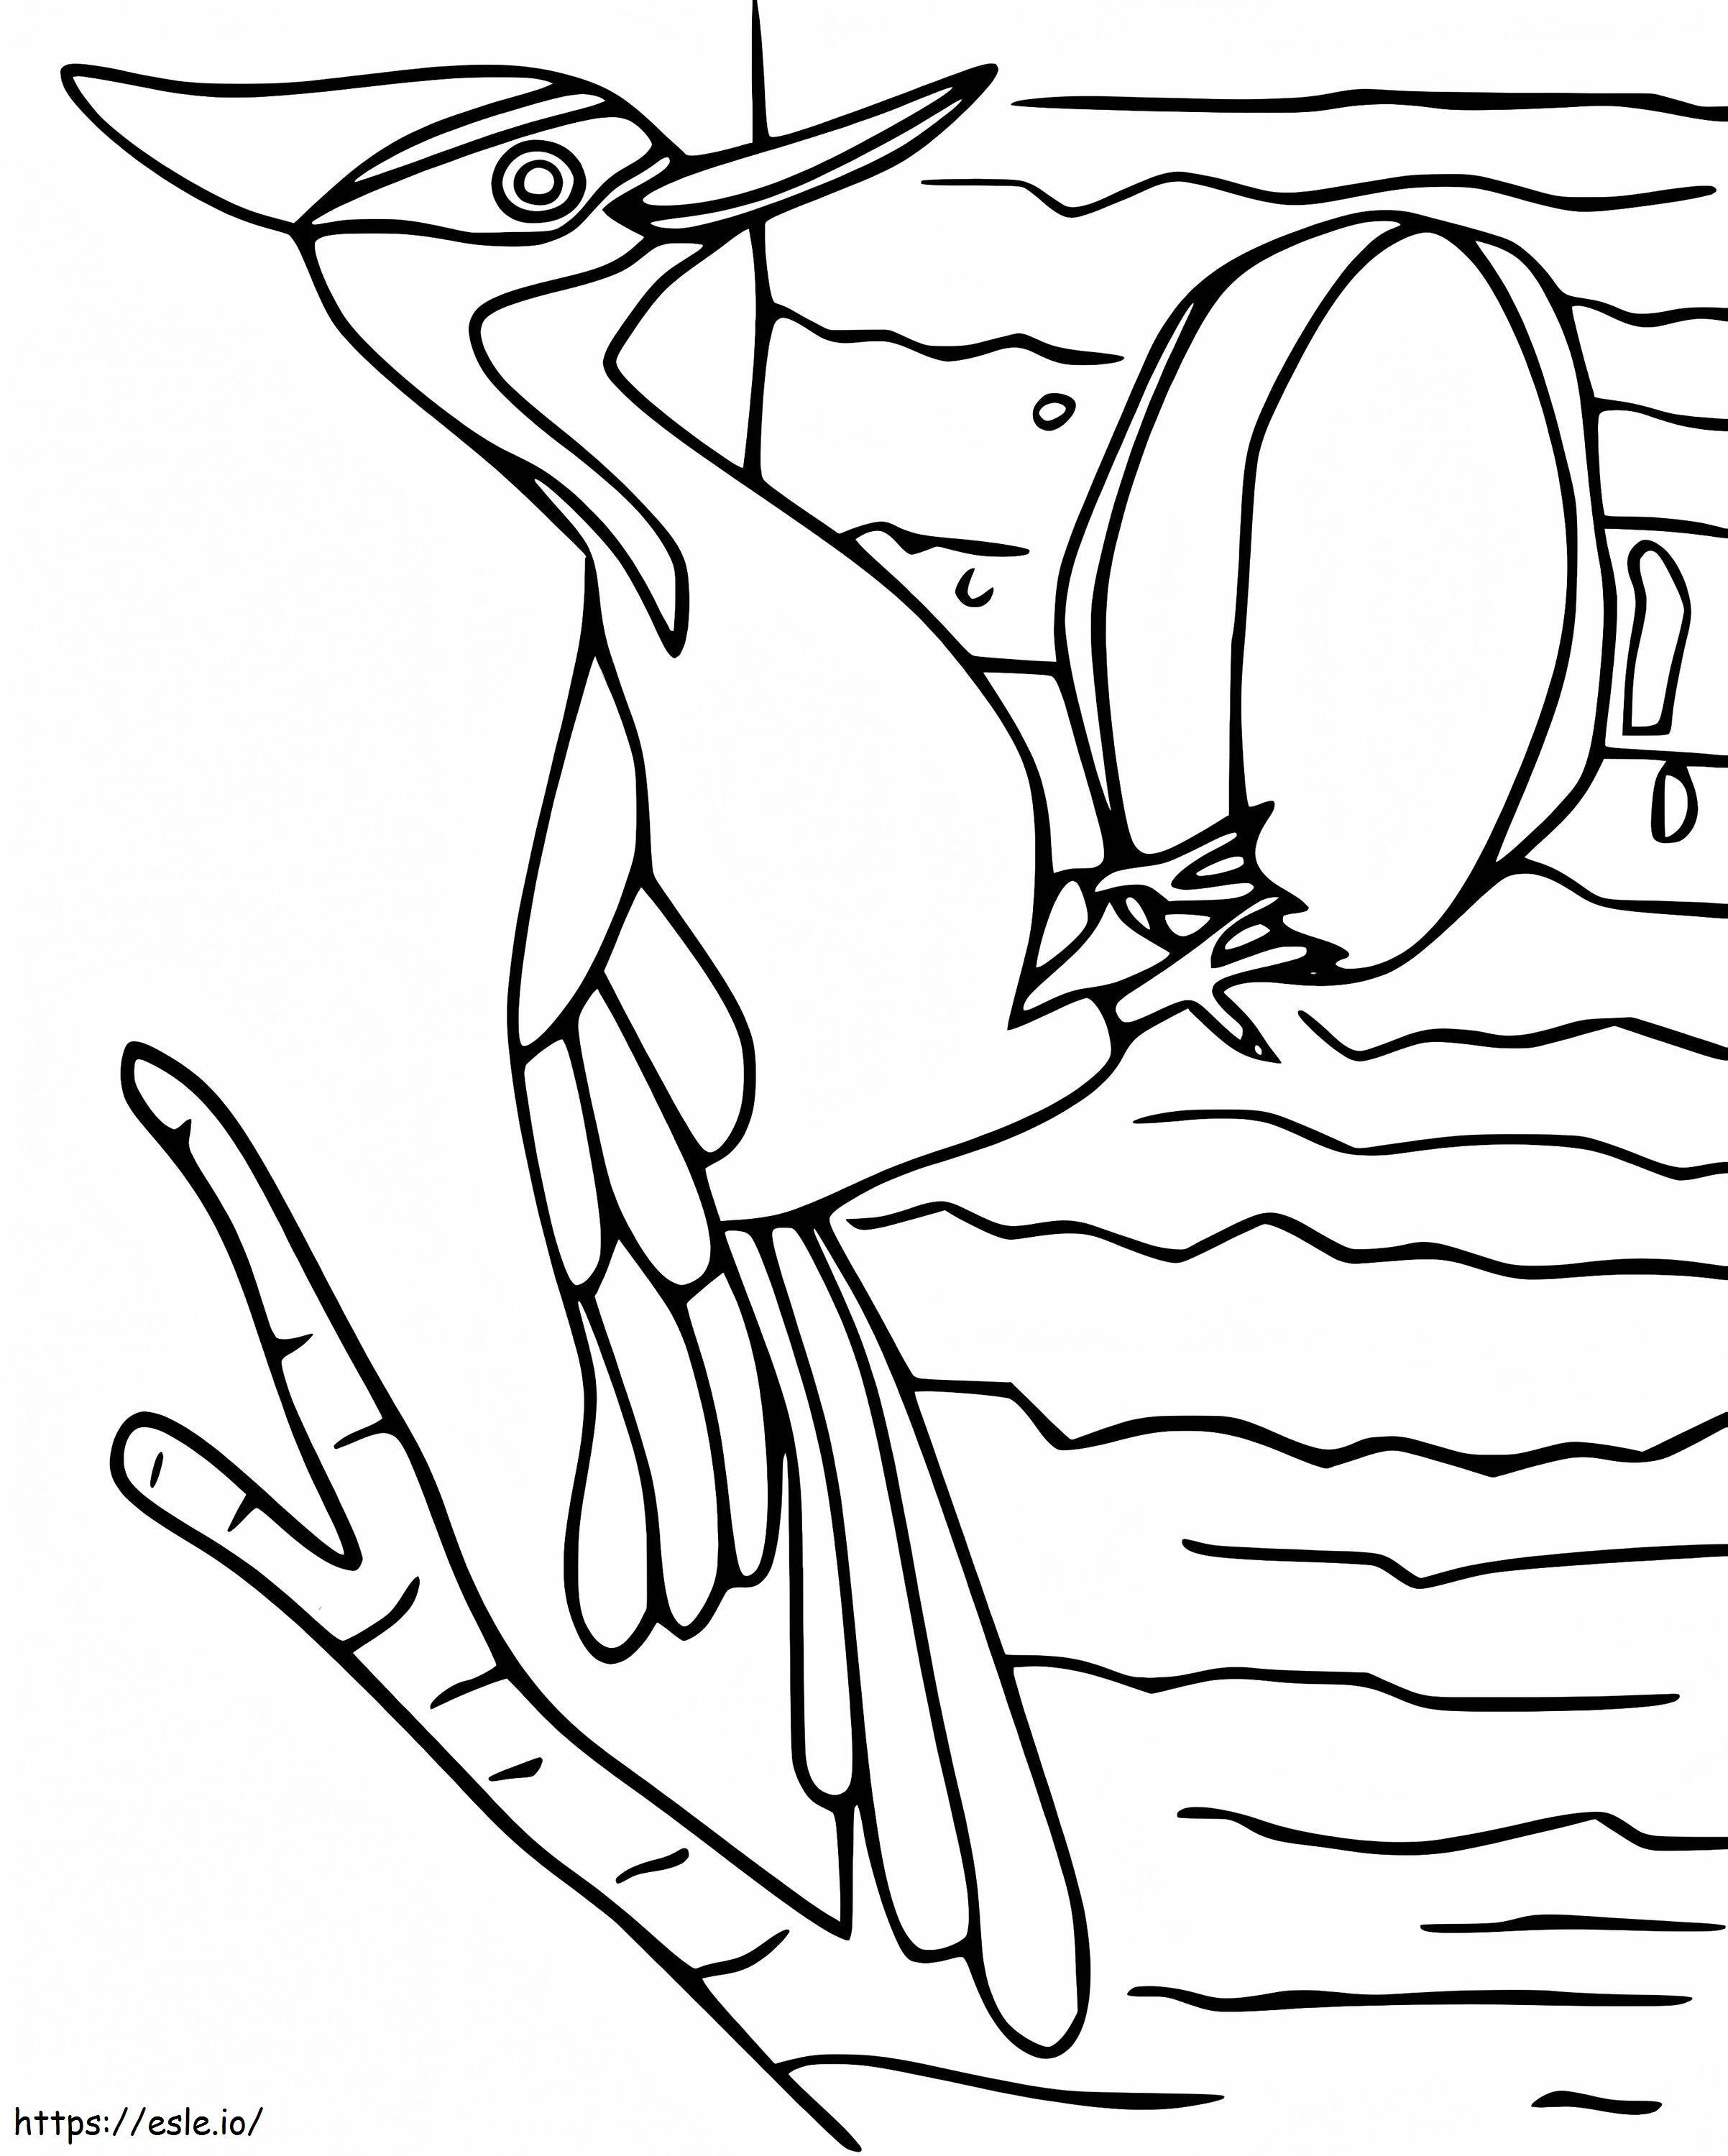 Woodpecker 7 coloring page